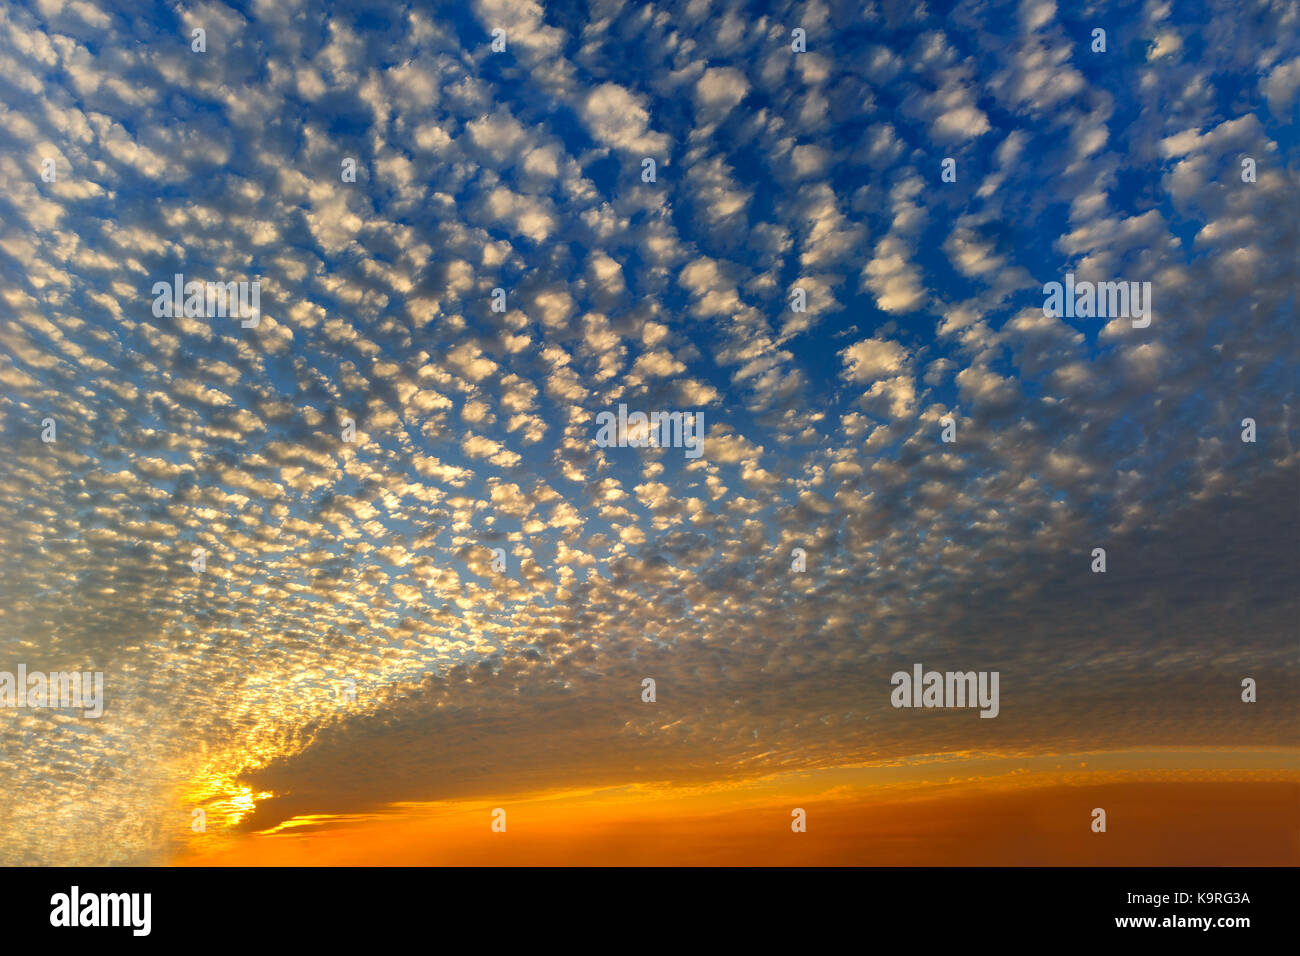 Sunset clouds is a sky filled with colorful patterned sunset clouds. Stock Photo